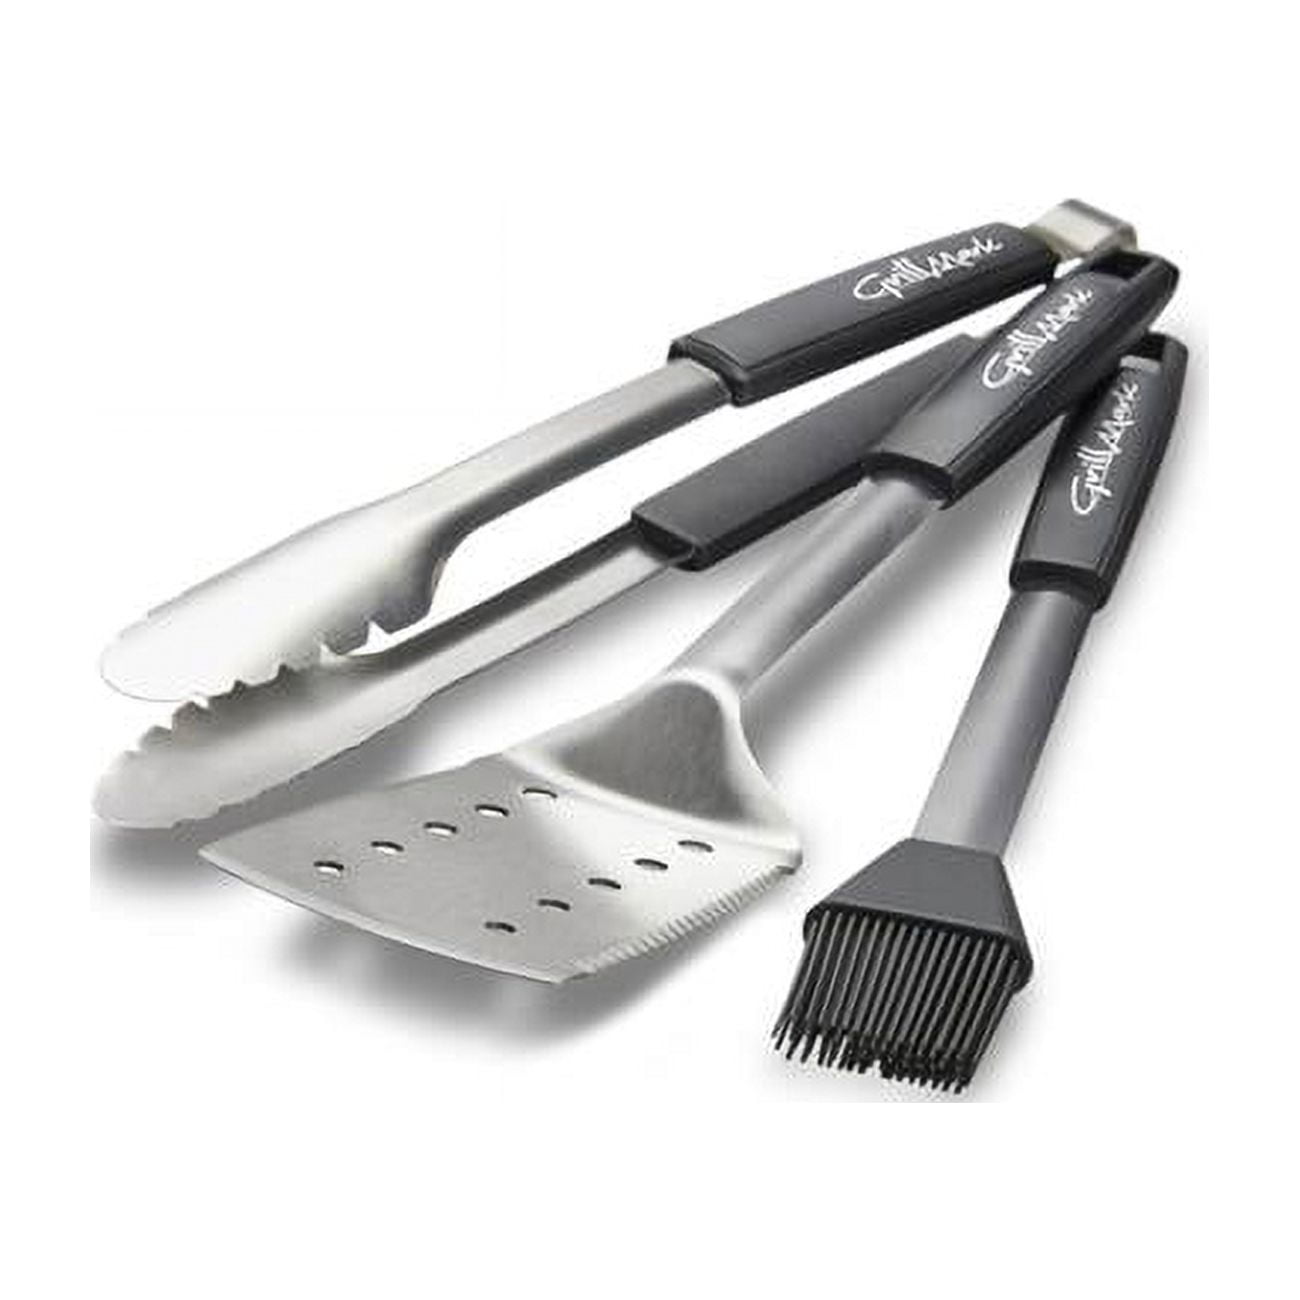 Picture of Grill Mark 8030439 Stainless Steel Grill Tool Set - 3 Piece